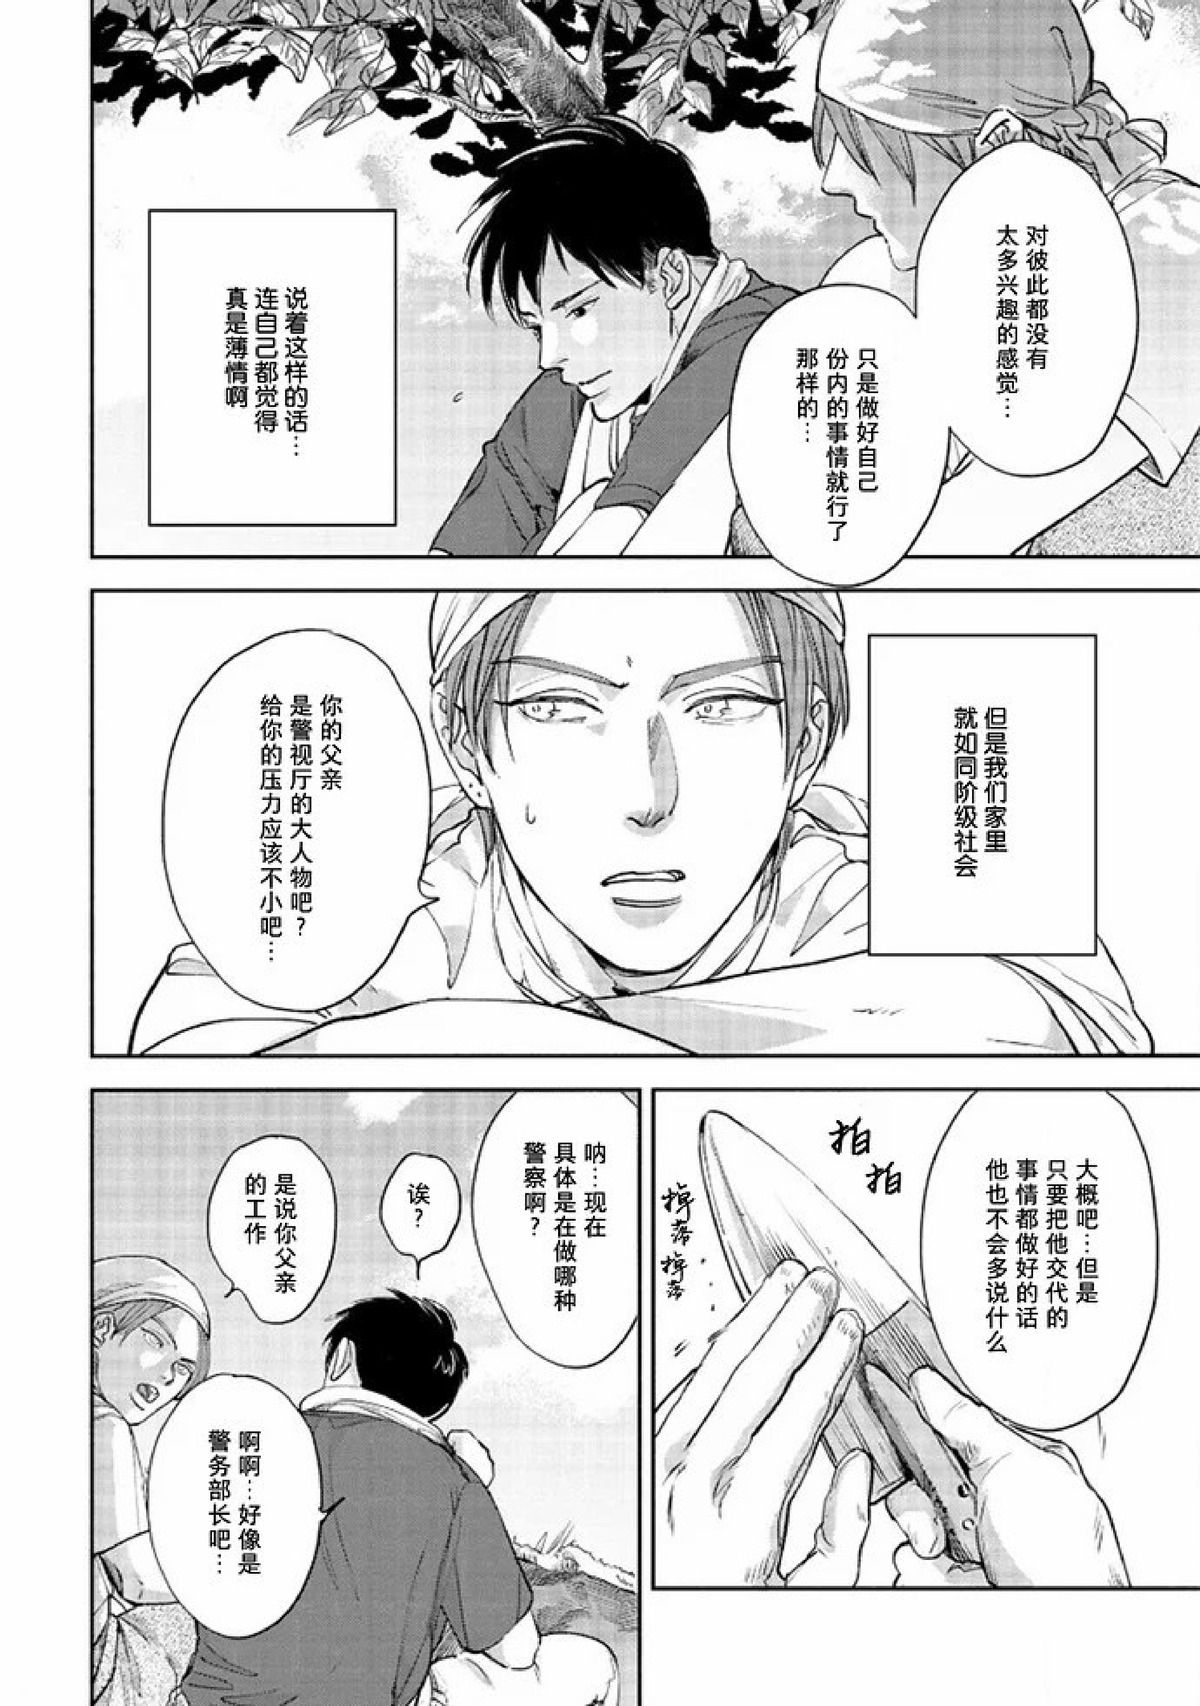 【Two sides of the same coin[耽美]】漫画-（上卷01-02）章节漫画下拉式图片-18.jpg